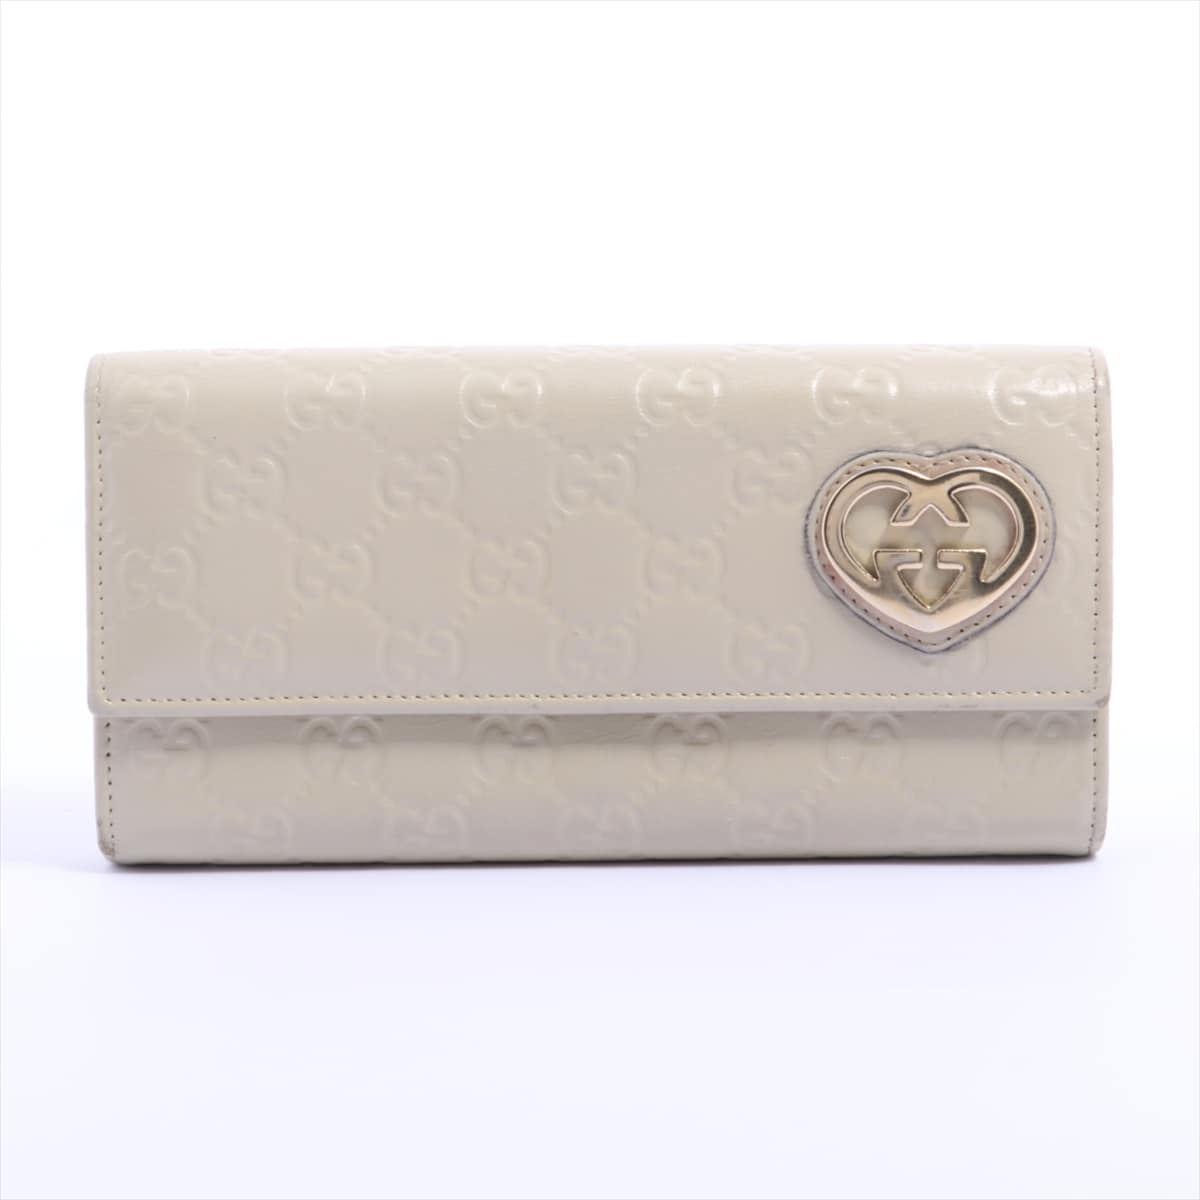 Gucci Guccissima Lovely Leather Wallet White 245723